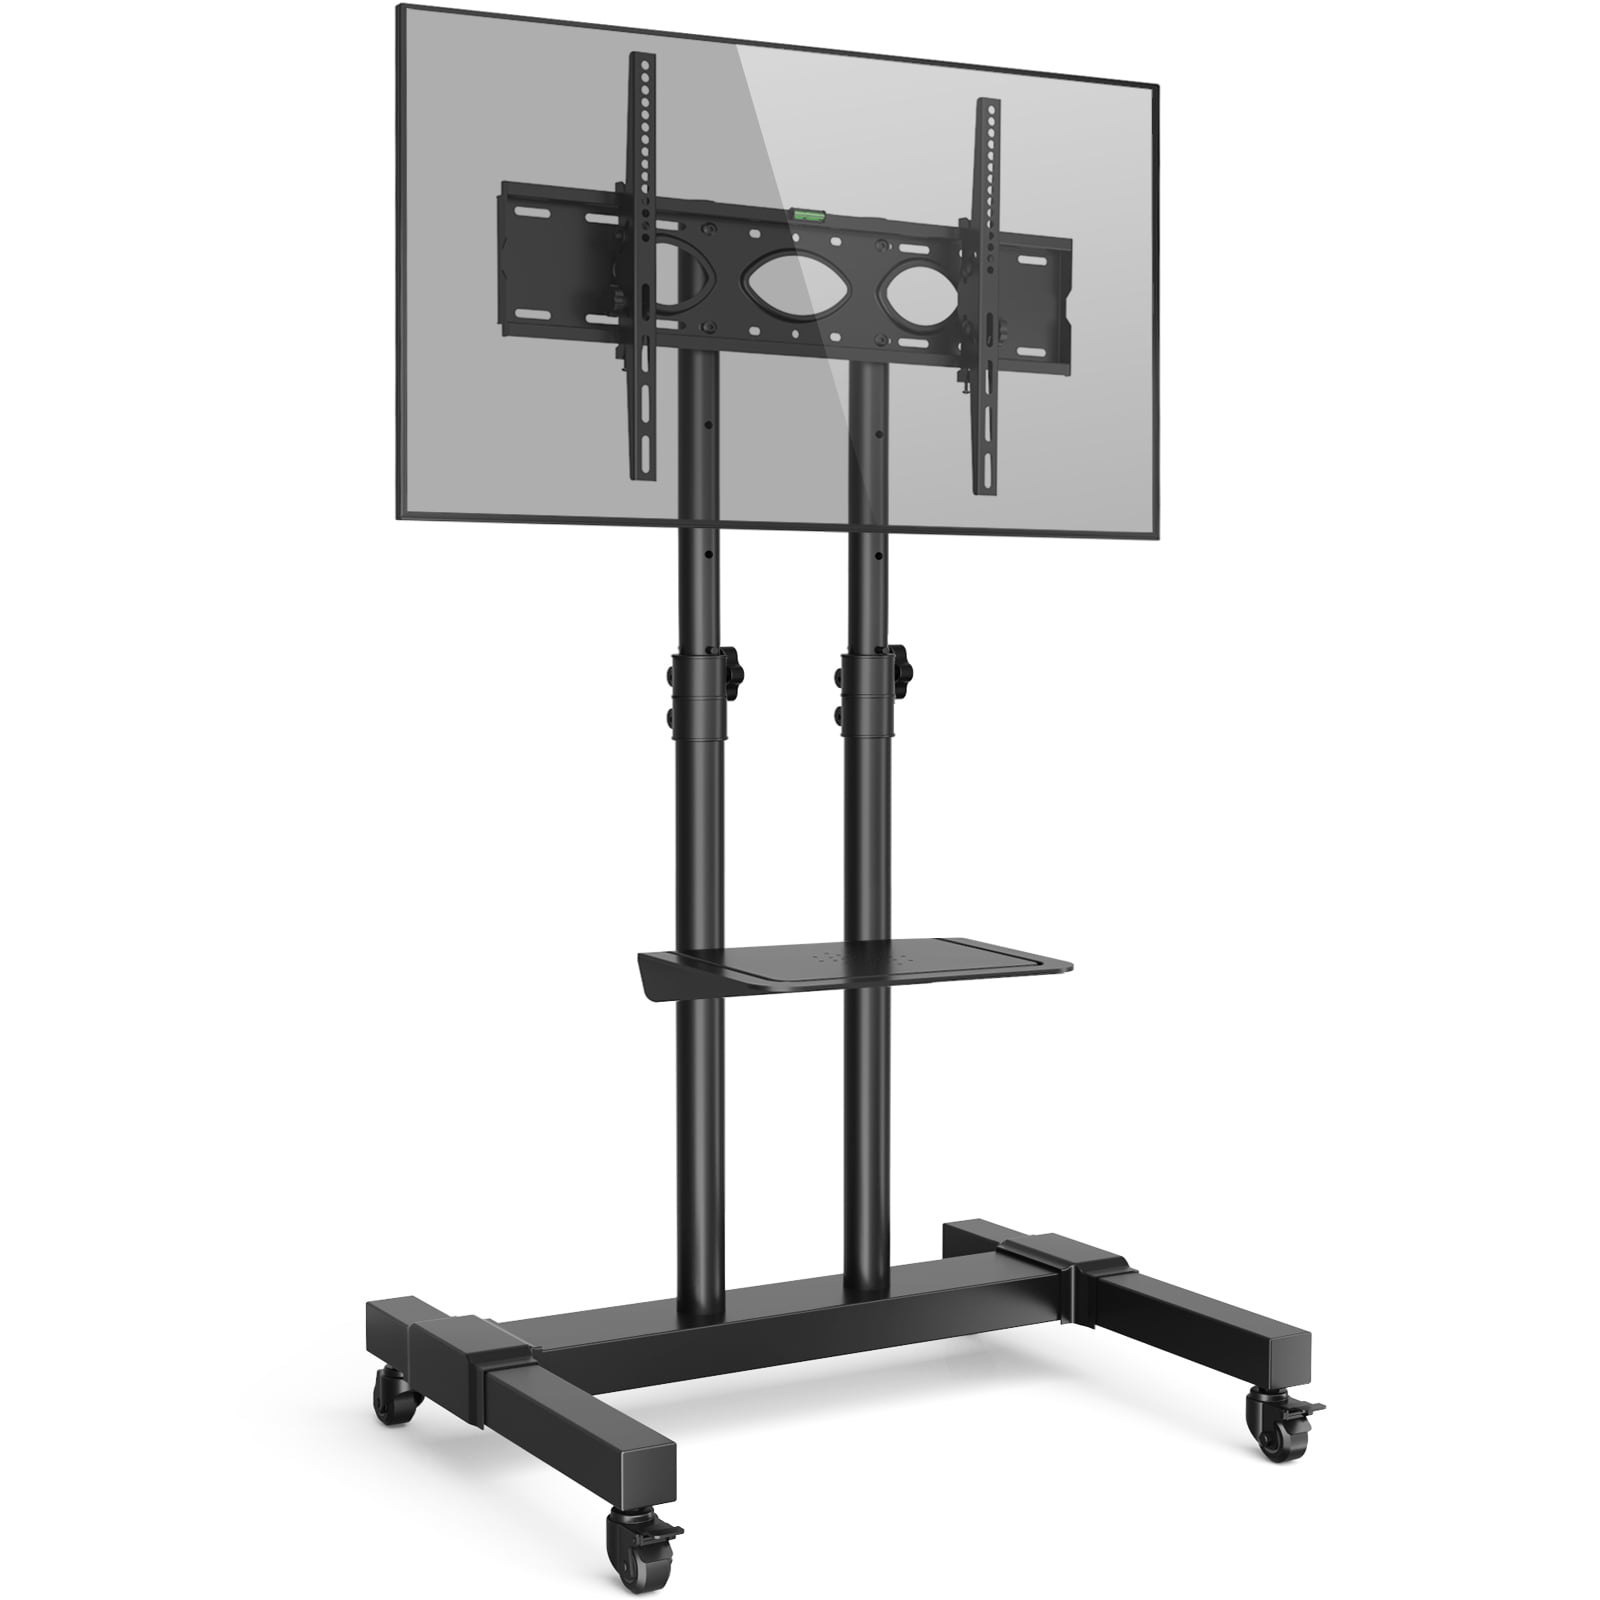 Mobile TV Stand with Locking Wheels/Tilt Mount for Most 32-65 Inch LCD LED TVs 